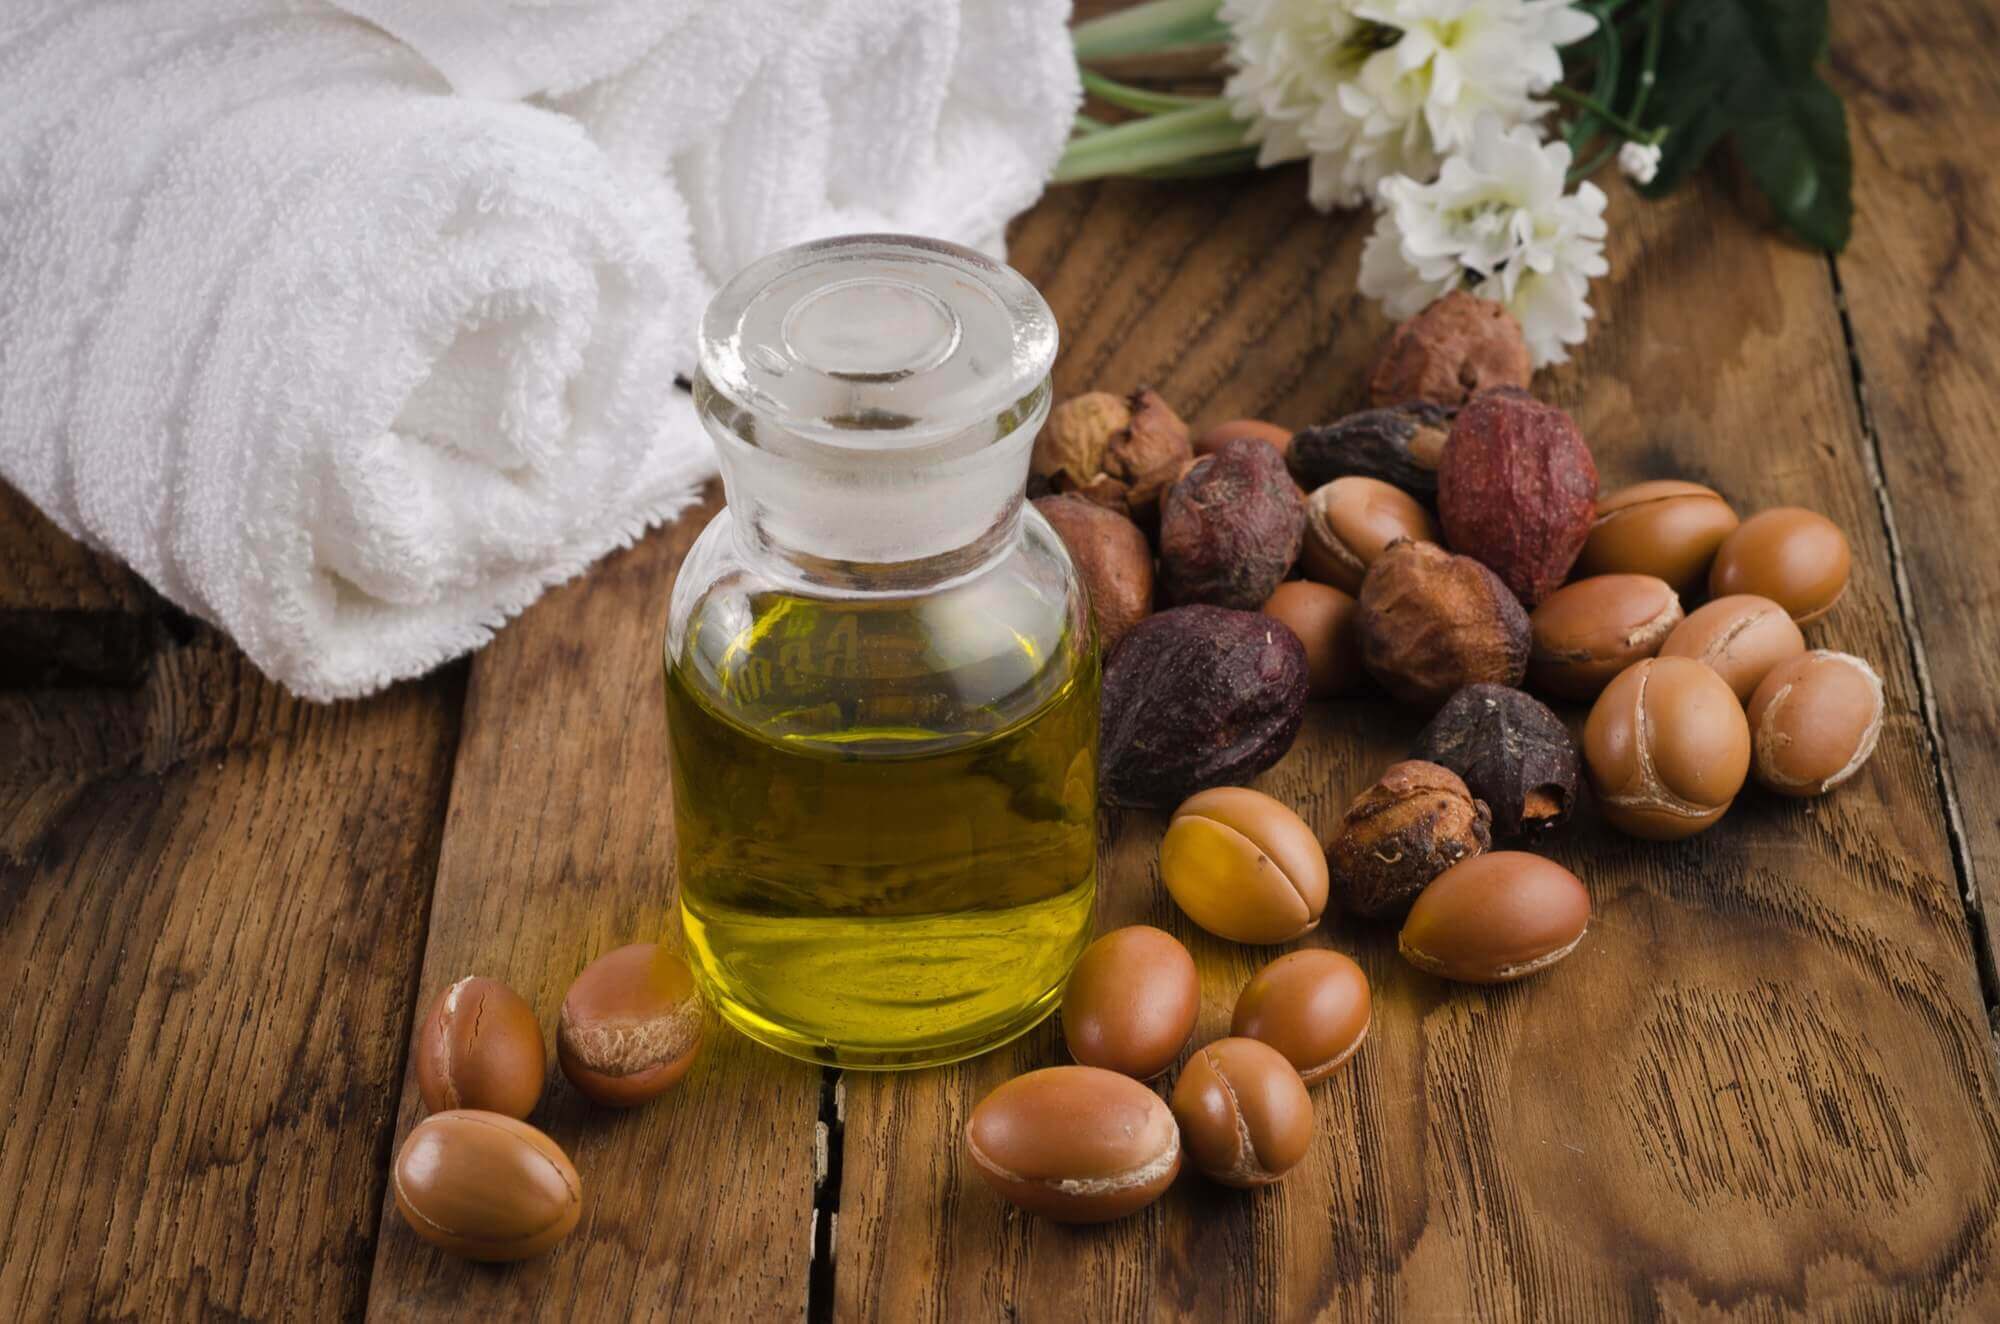 What Is Jojoba Oil And How Is It Used?